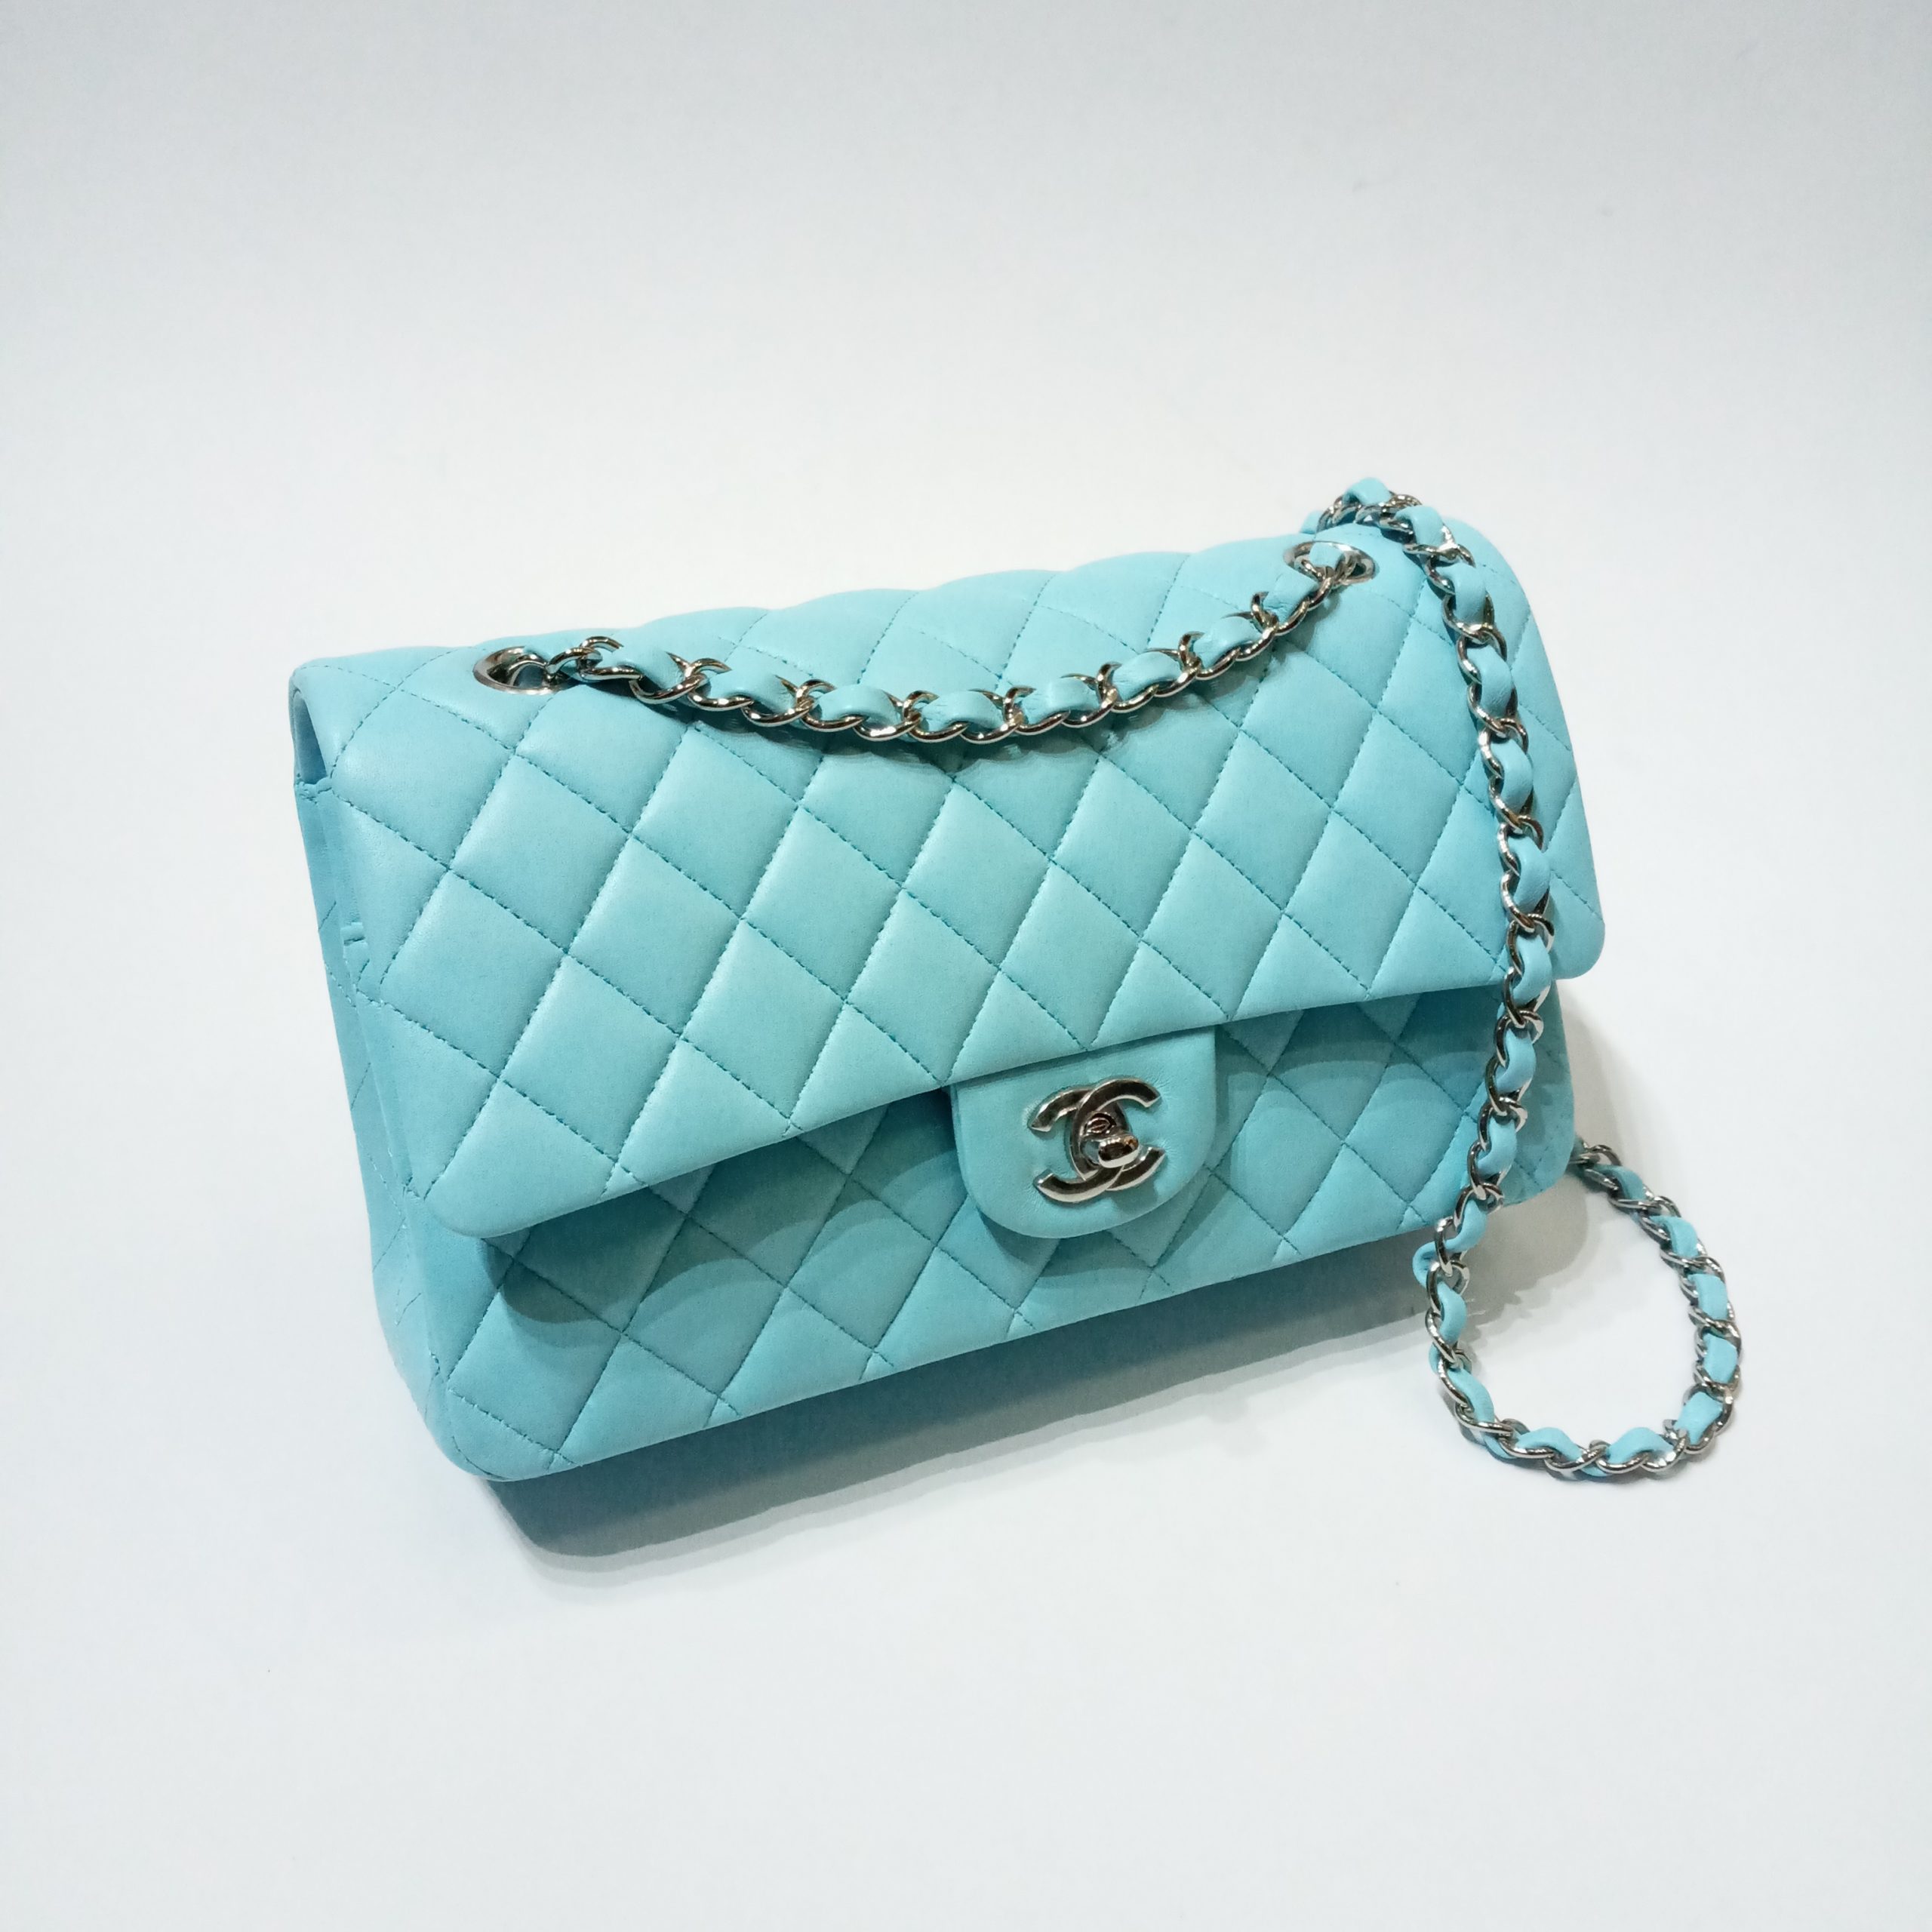 chanel inspired purse quilted